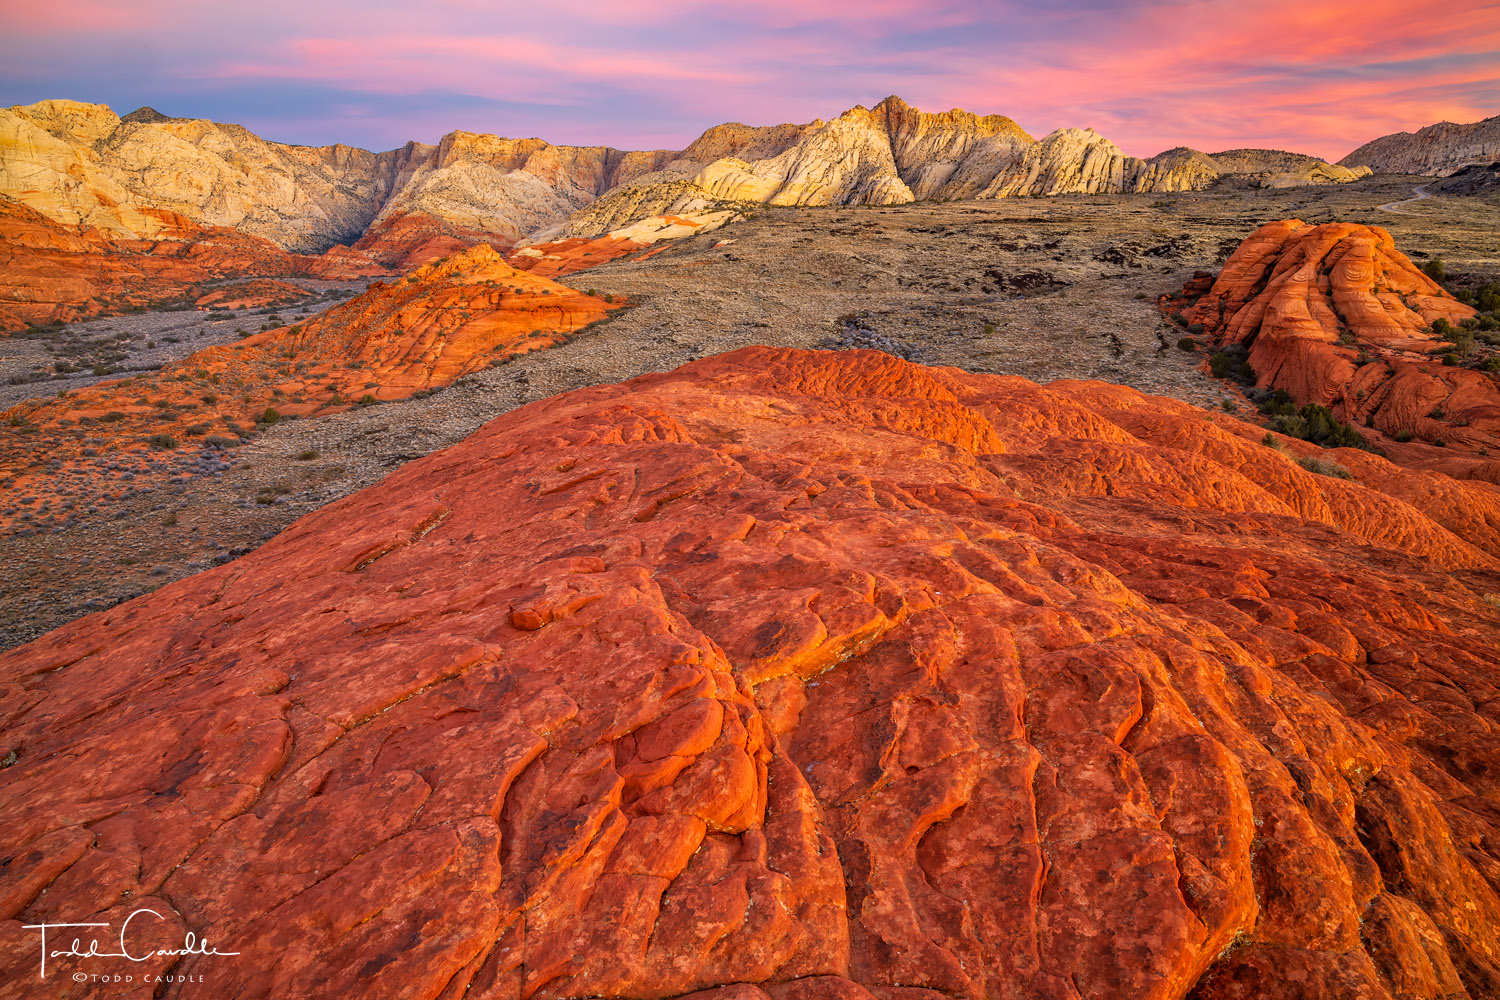 A beautiful sky filled with sunrise colors over the otherworldly landscape of Snow Canyon State Park in southwest Utah.